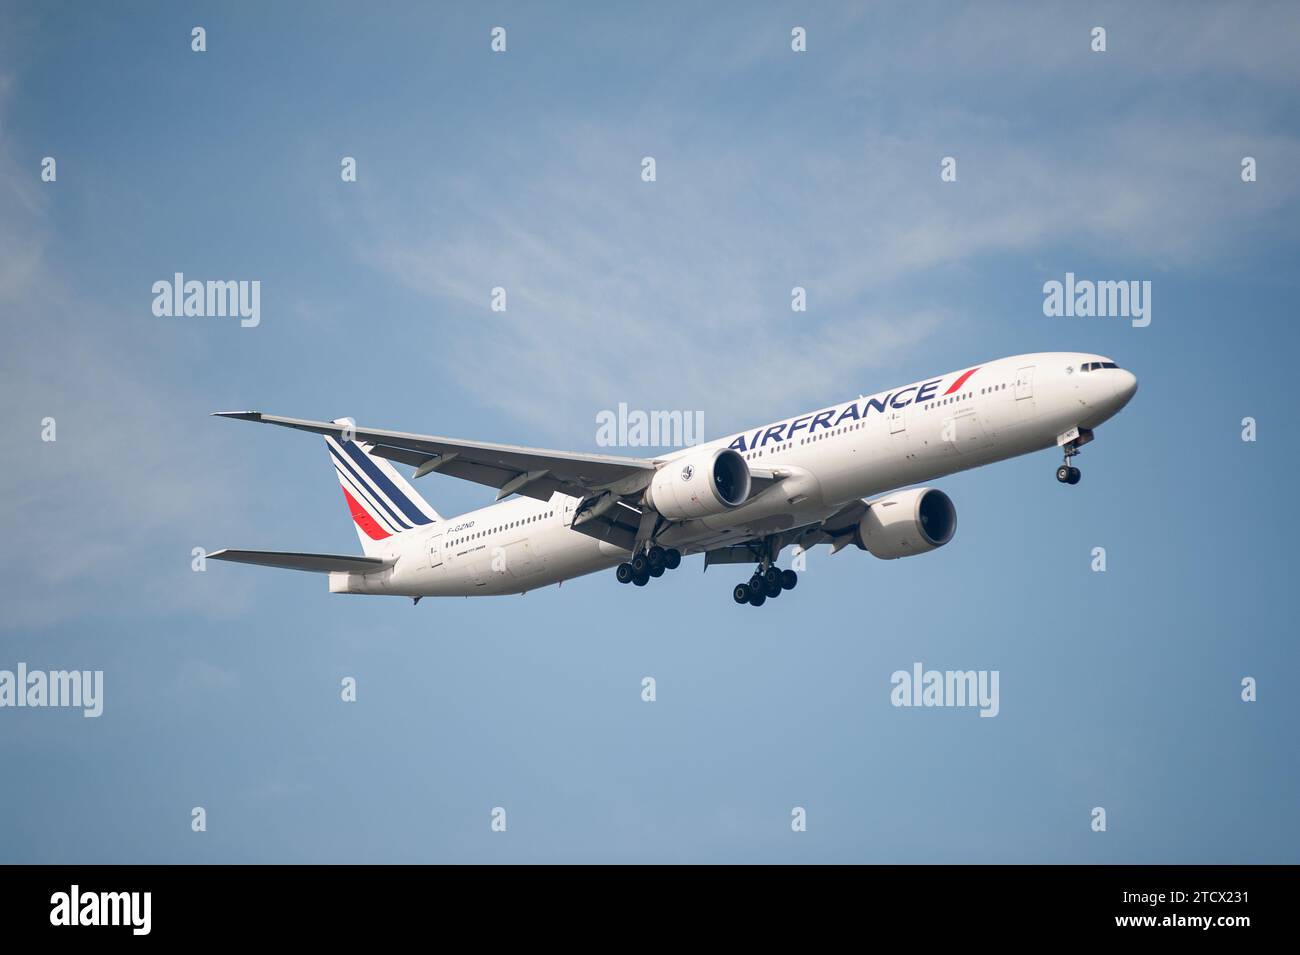 26.07.2023, Singapore, Republic of Singapore, Asia - An Air France Boeing 777-300ER passenger aircraft approaches Changi Airport for landing. Stock Photo